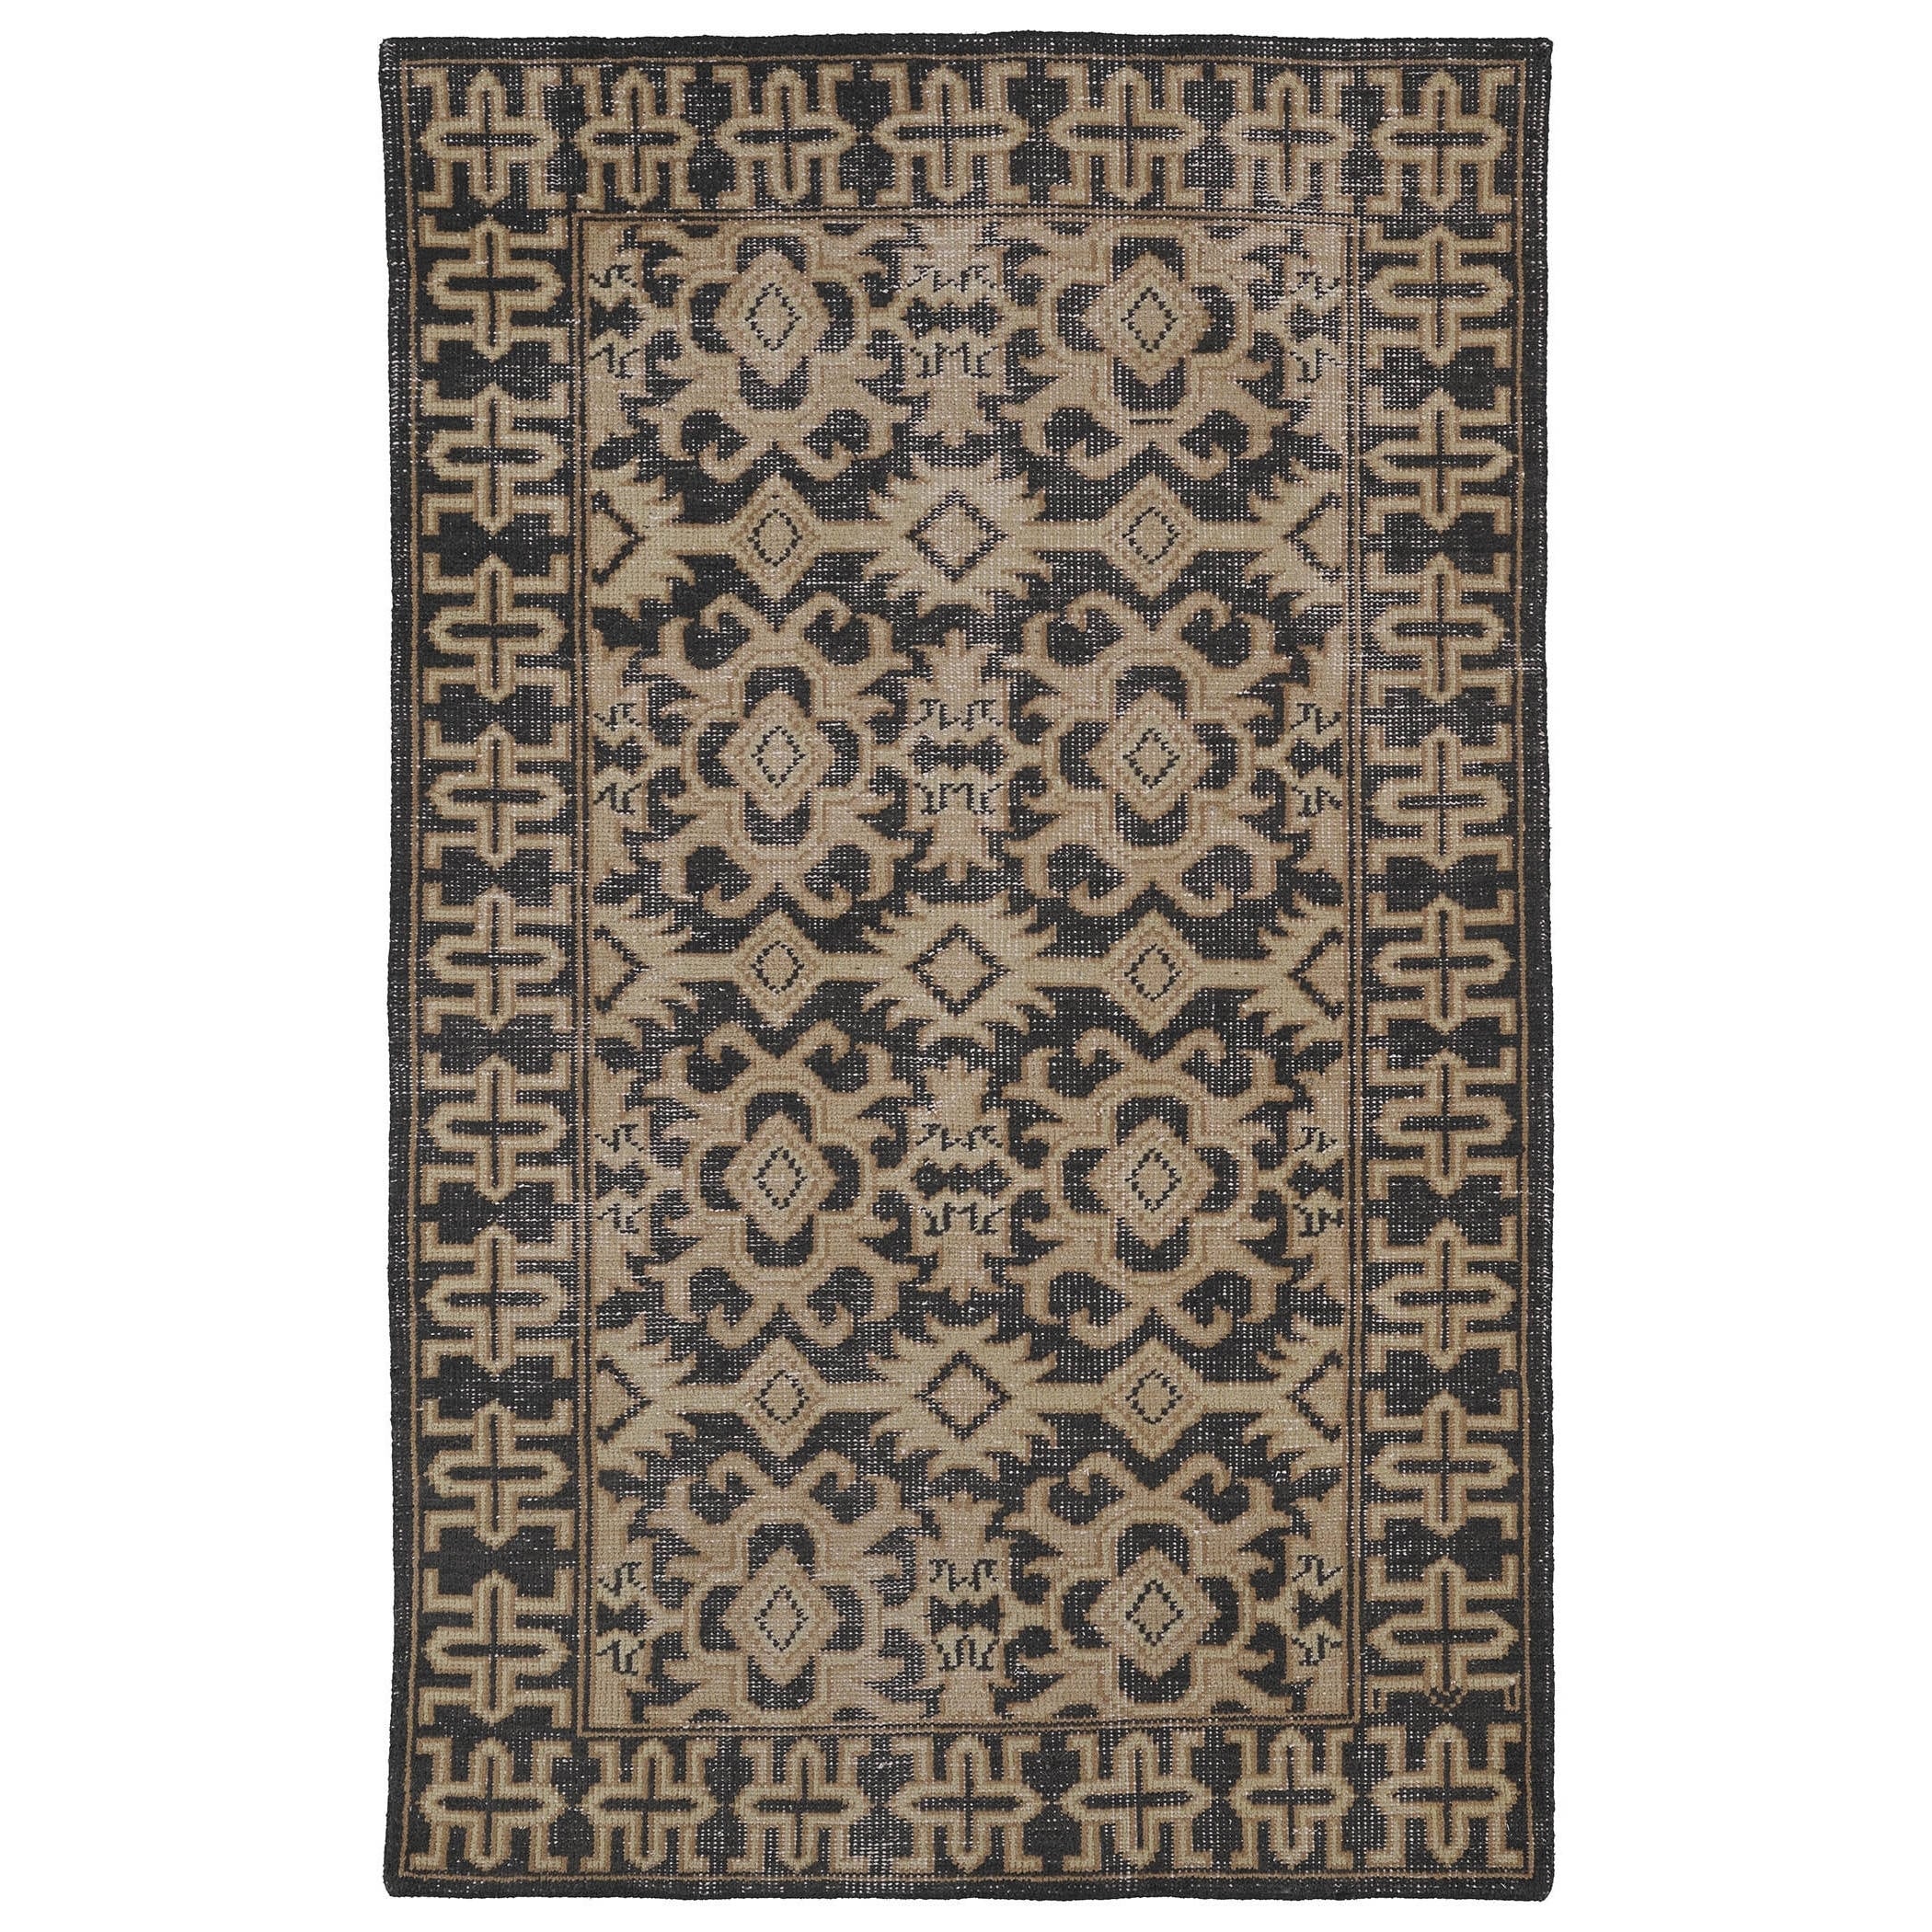 Hand knotted Vintage Replica Chocolate Brown Wool Rug (20 X 30)